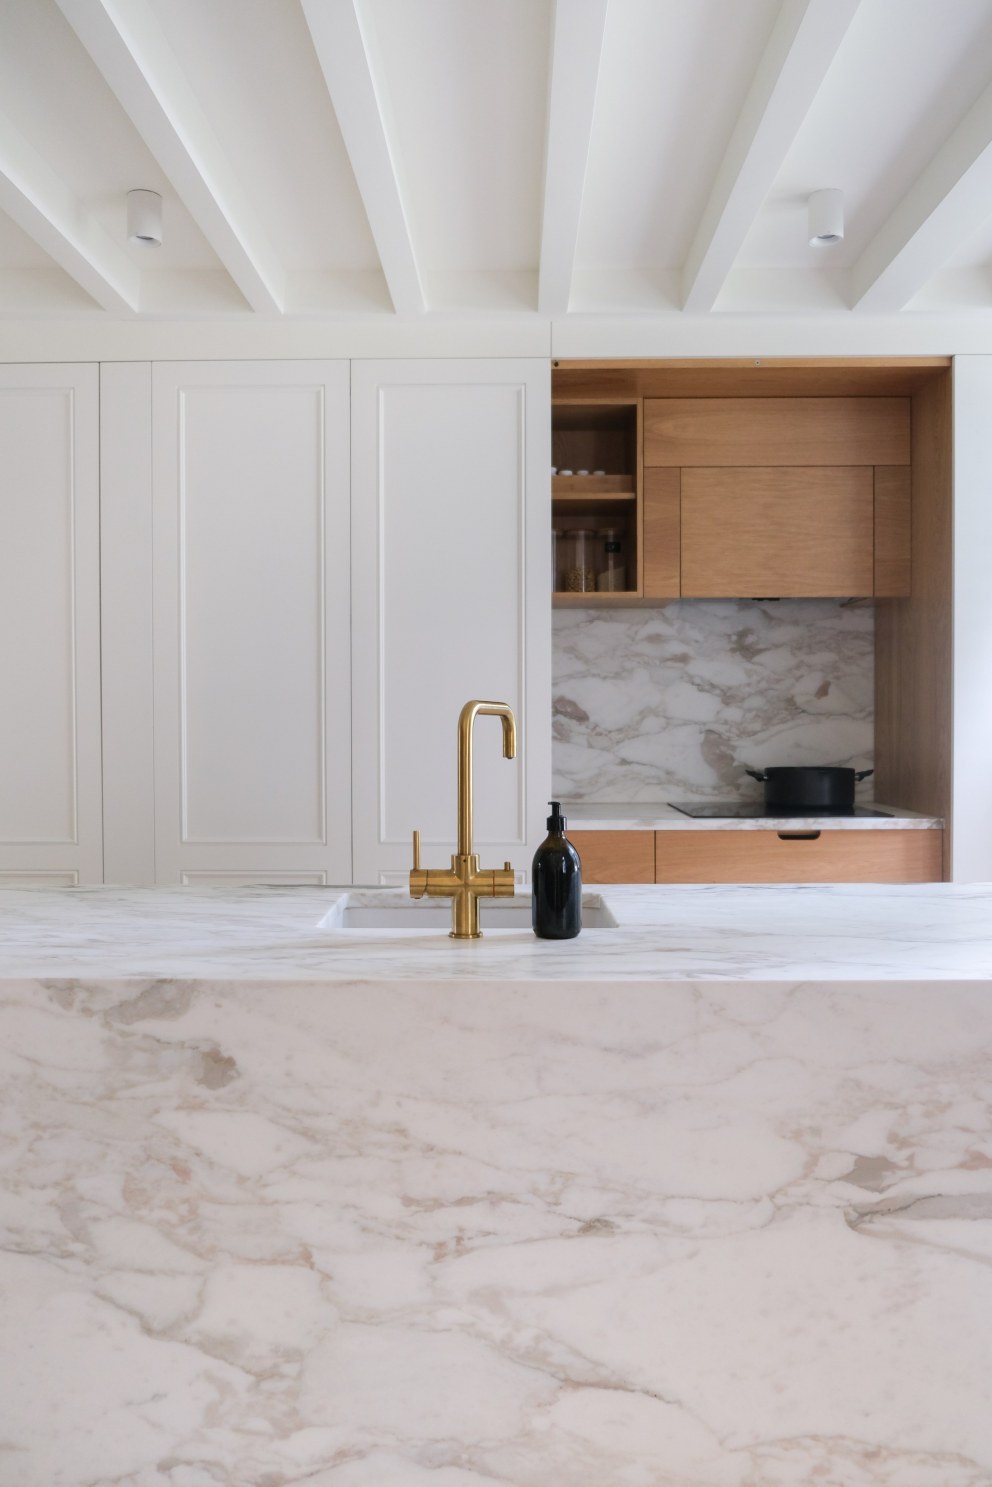 Grade II listed Hackney apartment | Partial reveal of kitchen | Interior Designers